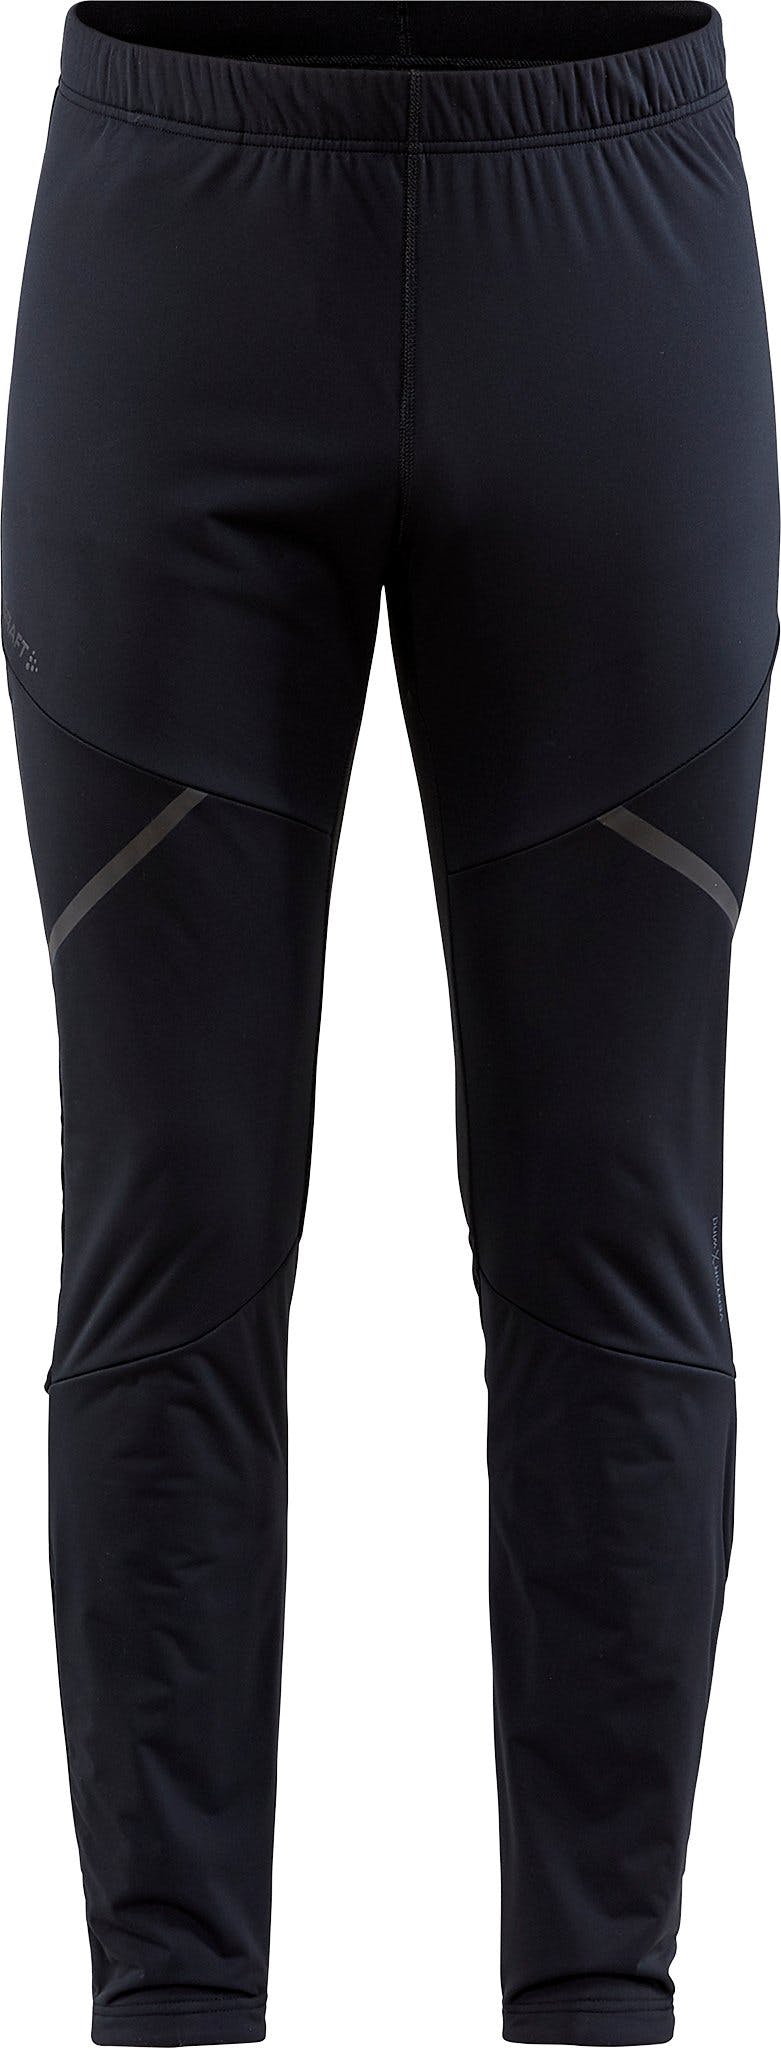 Product image for Core Glide Wind Tights - Men's